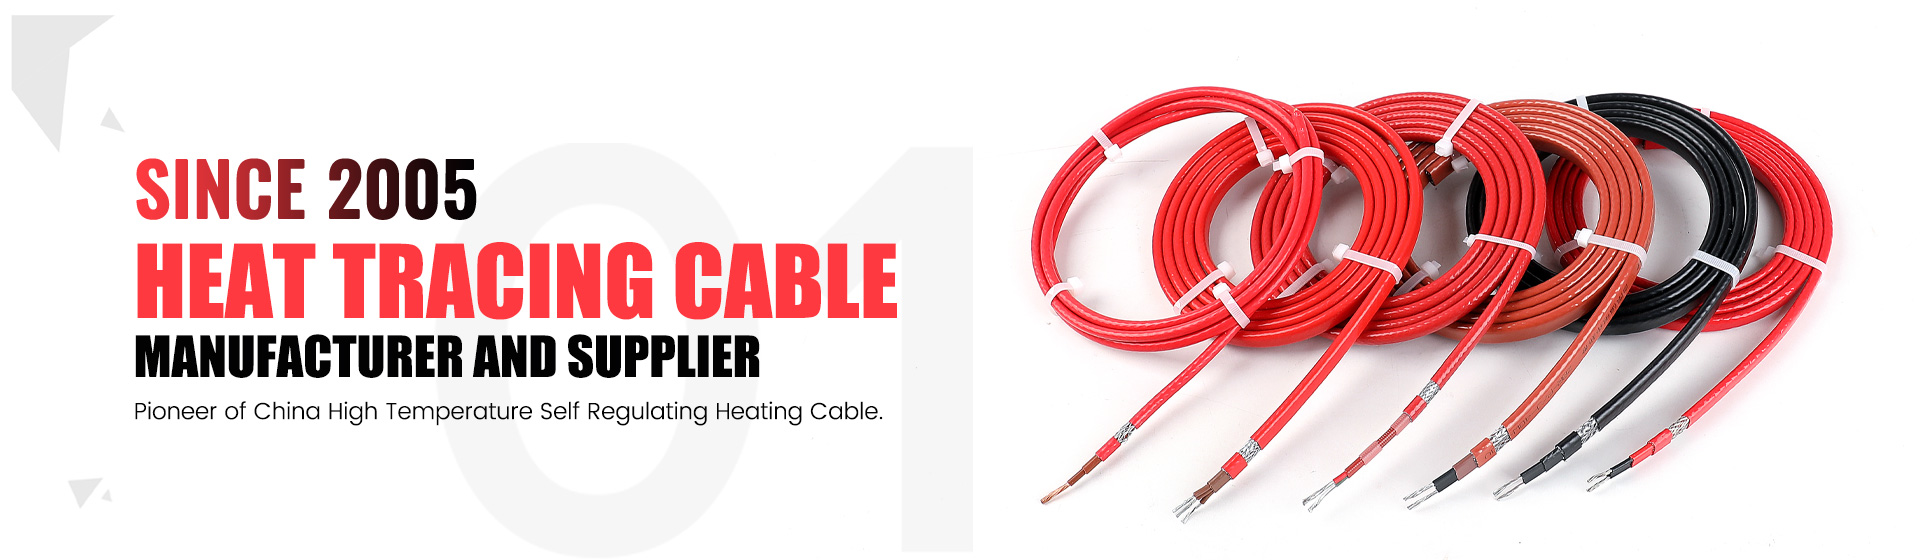 Banner-01-Heat-tracing-cable-manufacturer-and-supplier